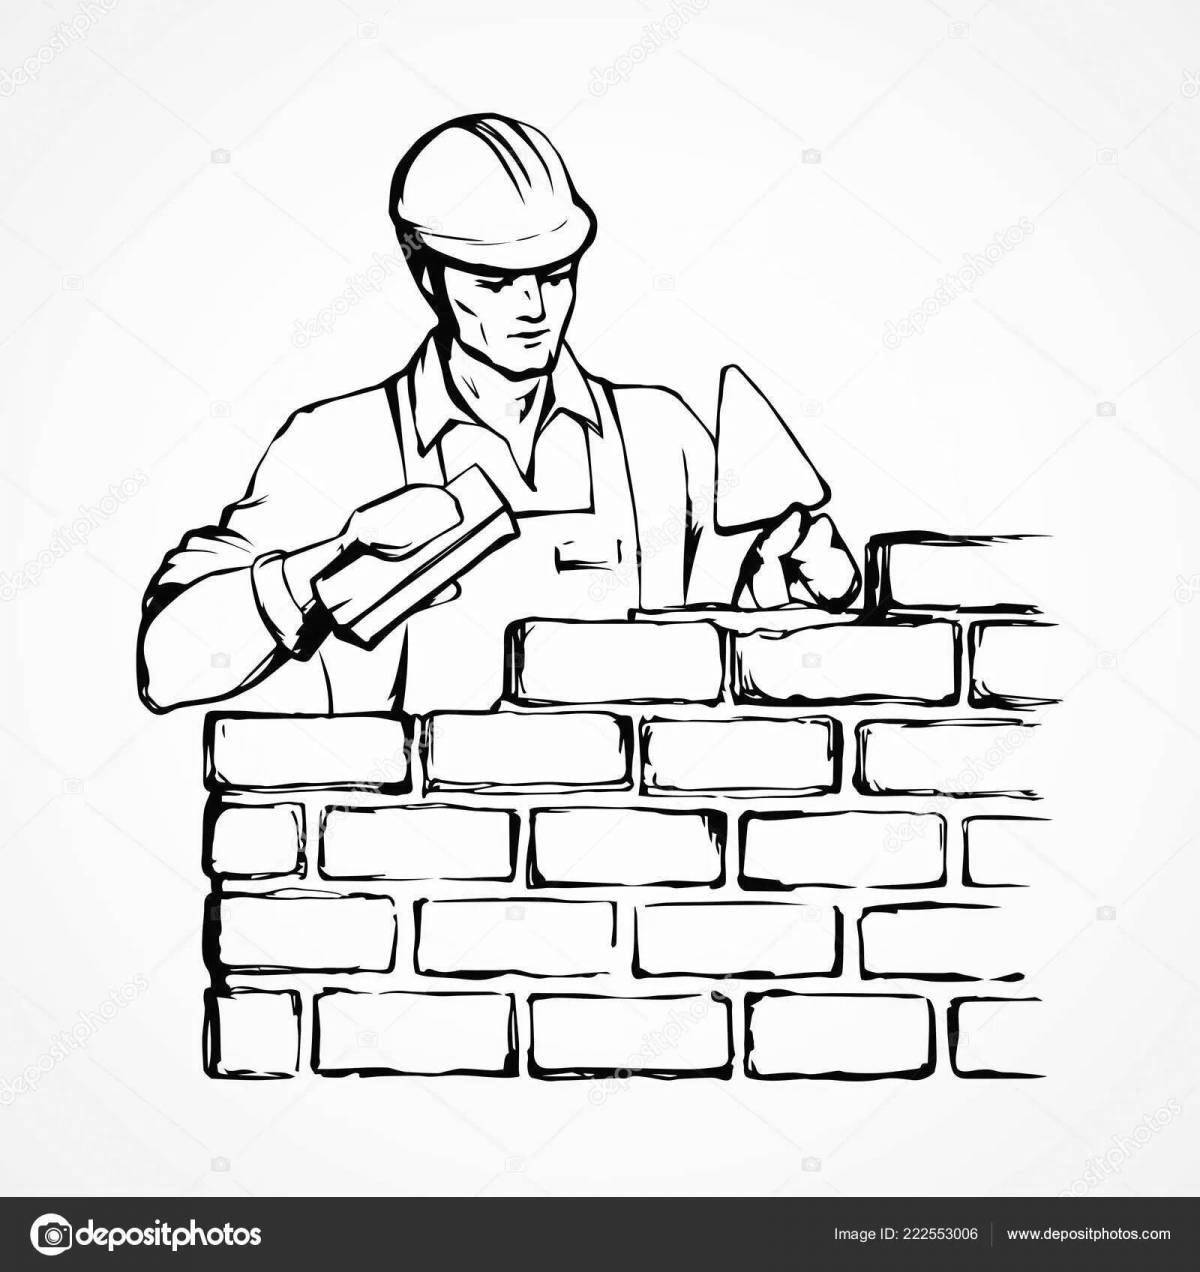 Playful bricklayer coloring page for kids